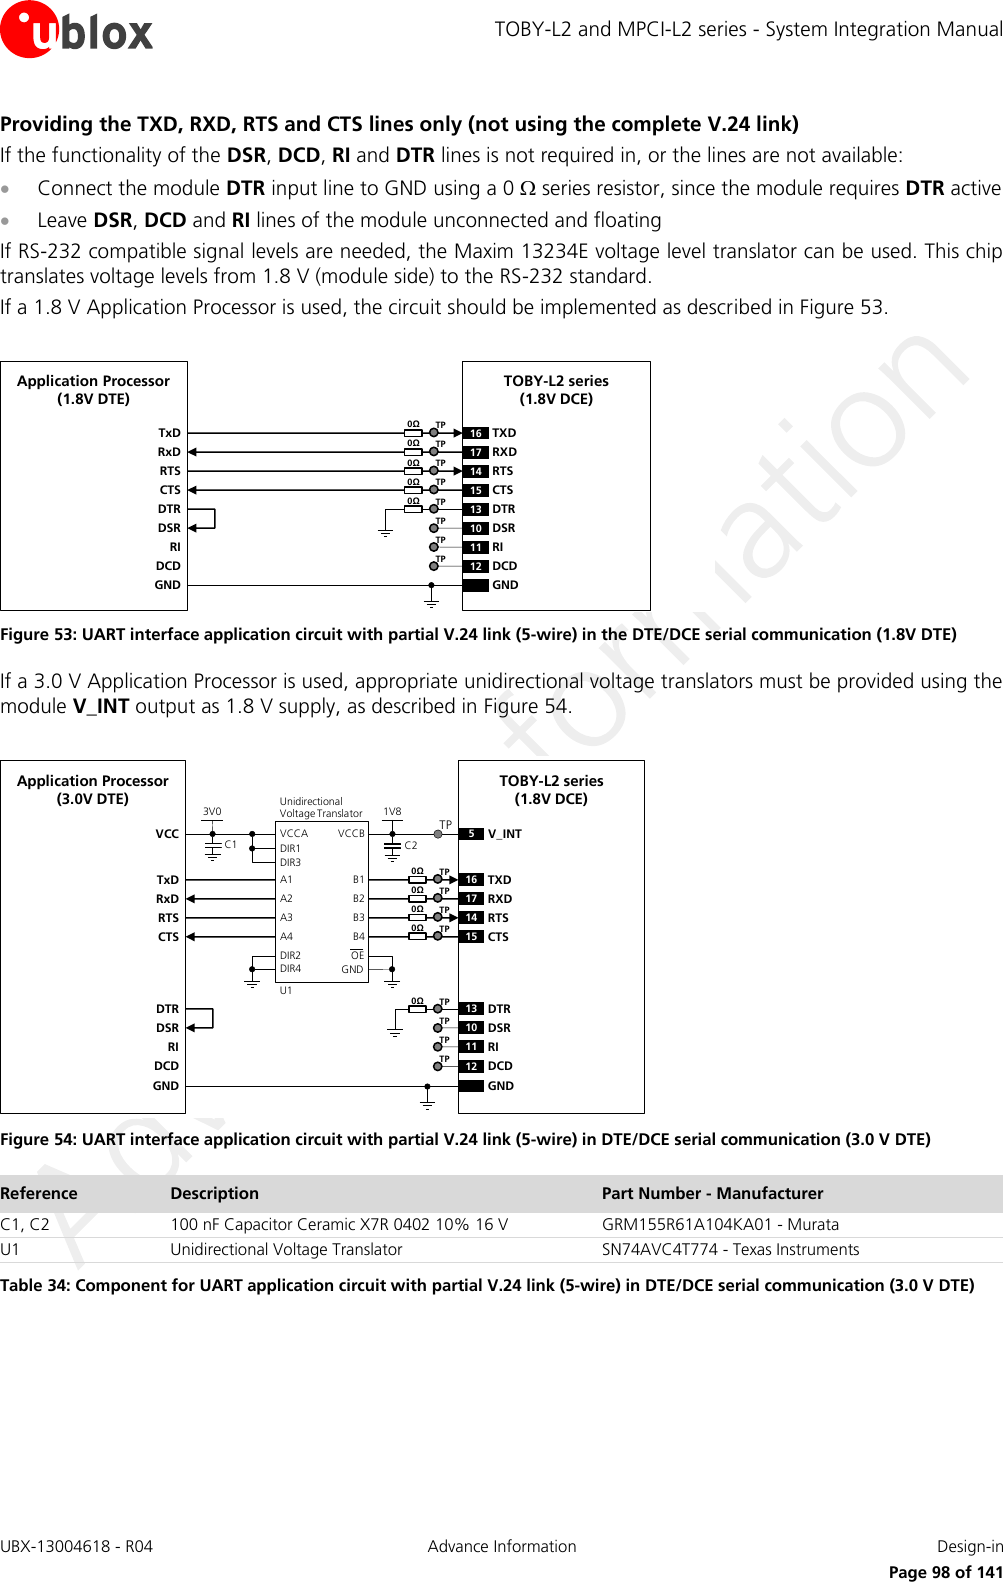 TOBY-L2 and MPCI-L2 series - System Integration Manual UBX-13004618 - R04  Advance Information  Design-in     Page 98 of 141 Providing the TXD, RXD, RTS and CTS lines only (not using the complete V.24 link) If the functionality of the DSR, DCD, RI and DTR lines is not required in, or the lines are not available:  Connect the module DTR input line to GND using a 0  series resistor, since the module requires DTR active  Leave DSR, DCD and RI lines of the module unconnected and floating If RS-232 compatible signal levels are needed, the Maxim 13234E voltage level translator can be used. This chip translates voltage levels from 1.8 V (module side) to the RS-232 standard. If a 1.8 V Application Processor is used, the circuit should be implemented as described in Figure 53.  TxDApplication Processor(1.8V DTE)RxDRTSCTSDTRDSRRIDCDGNDTOBY-L2 series (1.8V DCE)16 TXD13 DTR17 RXD14 RTS15 CTS10 DSR11 RI12 DCDGND0ΩTP0ΩTP0ΩTP0ΩTP0ΩTPTPTPTP Figure 53: UART interface application circuit with partial V.24 link (5-wire) in the DTE/DCE serial communication (1.8V DTE) If a 3.0 V Application Processor is used, appropriate unidirectional voltage translators must be provided using the module V_INT output as 1.8 V supply, as described in Figure 54.  5V_INTTxDApplication Processor(3.0V DTE)RxDRTSCTSDTRDSRRIDCDGNDTOBY-L2 series (1.8V DCE)16 TXD13 DTR17 RXD14 RTS15 CTS10 DSR11 RI12 DCDGND1V8B1 A1GNDU1B3A3VCCBVCCAUnidirectionalVoltage TranslatorC1 C23V0DIR3DIR2 OEDIR1VCCB2 A2B4A4DIR4TP0ΩTP0ΩTP0ΩTP0ΩTP0ΩTPTPTPTP Figure 54: UART interface application circuit with partial V.24 link (5-wire) in DTE/DCE serial communication (3.0 V DTE) Reference Description Part Number - Manufacturer C1, C2 100 nF Capacitor Ceramic X7R 0402 10% 16 V GRM155R61A104KA01 - Murata U1 Unidirectional Voltage Translator SN74AVC4T774 - Texas Instruments Table 34: Component for UART application circuit with partial V.24 link (5-wire) in DTE/DCE serial communication (3.0 V DTE)  